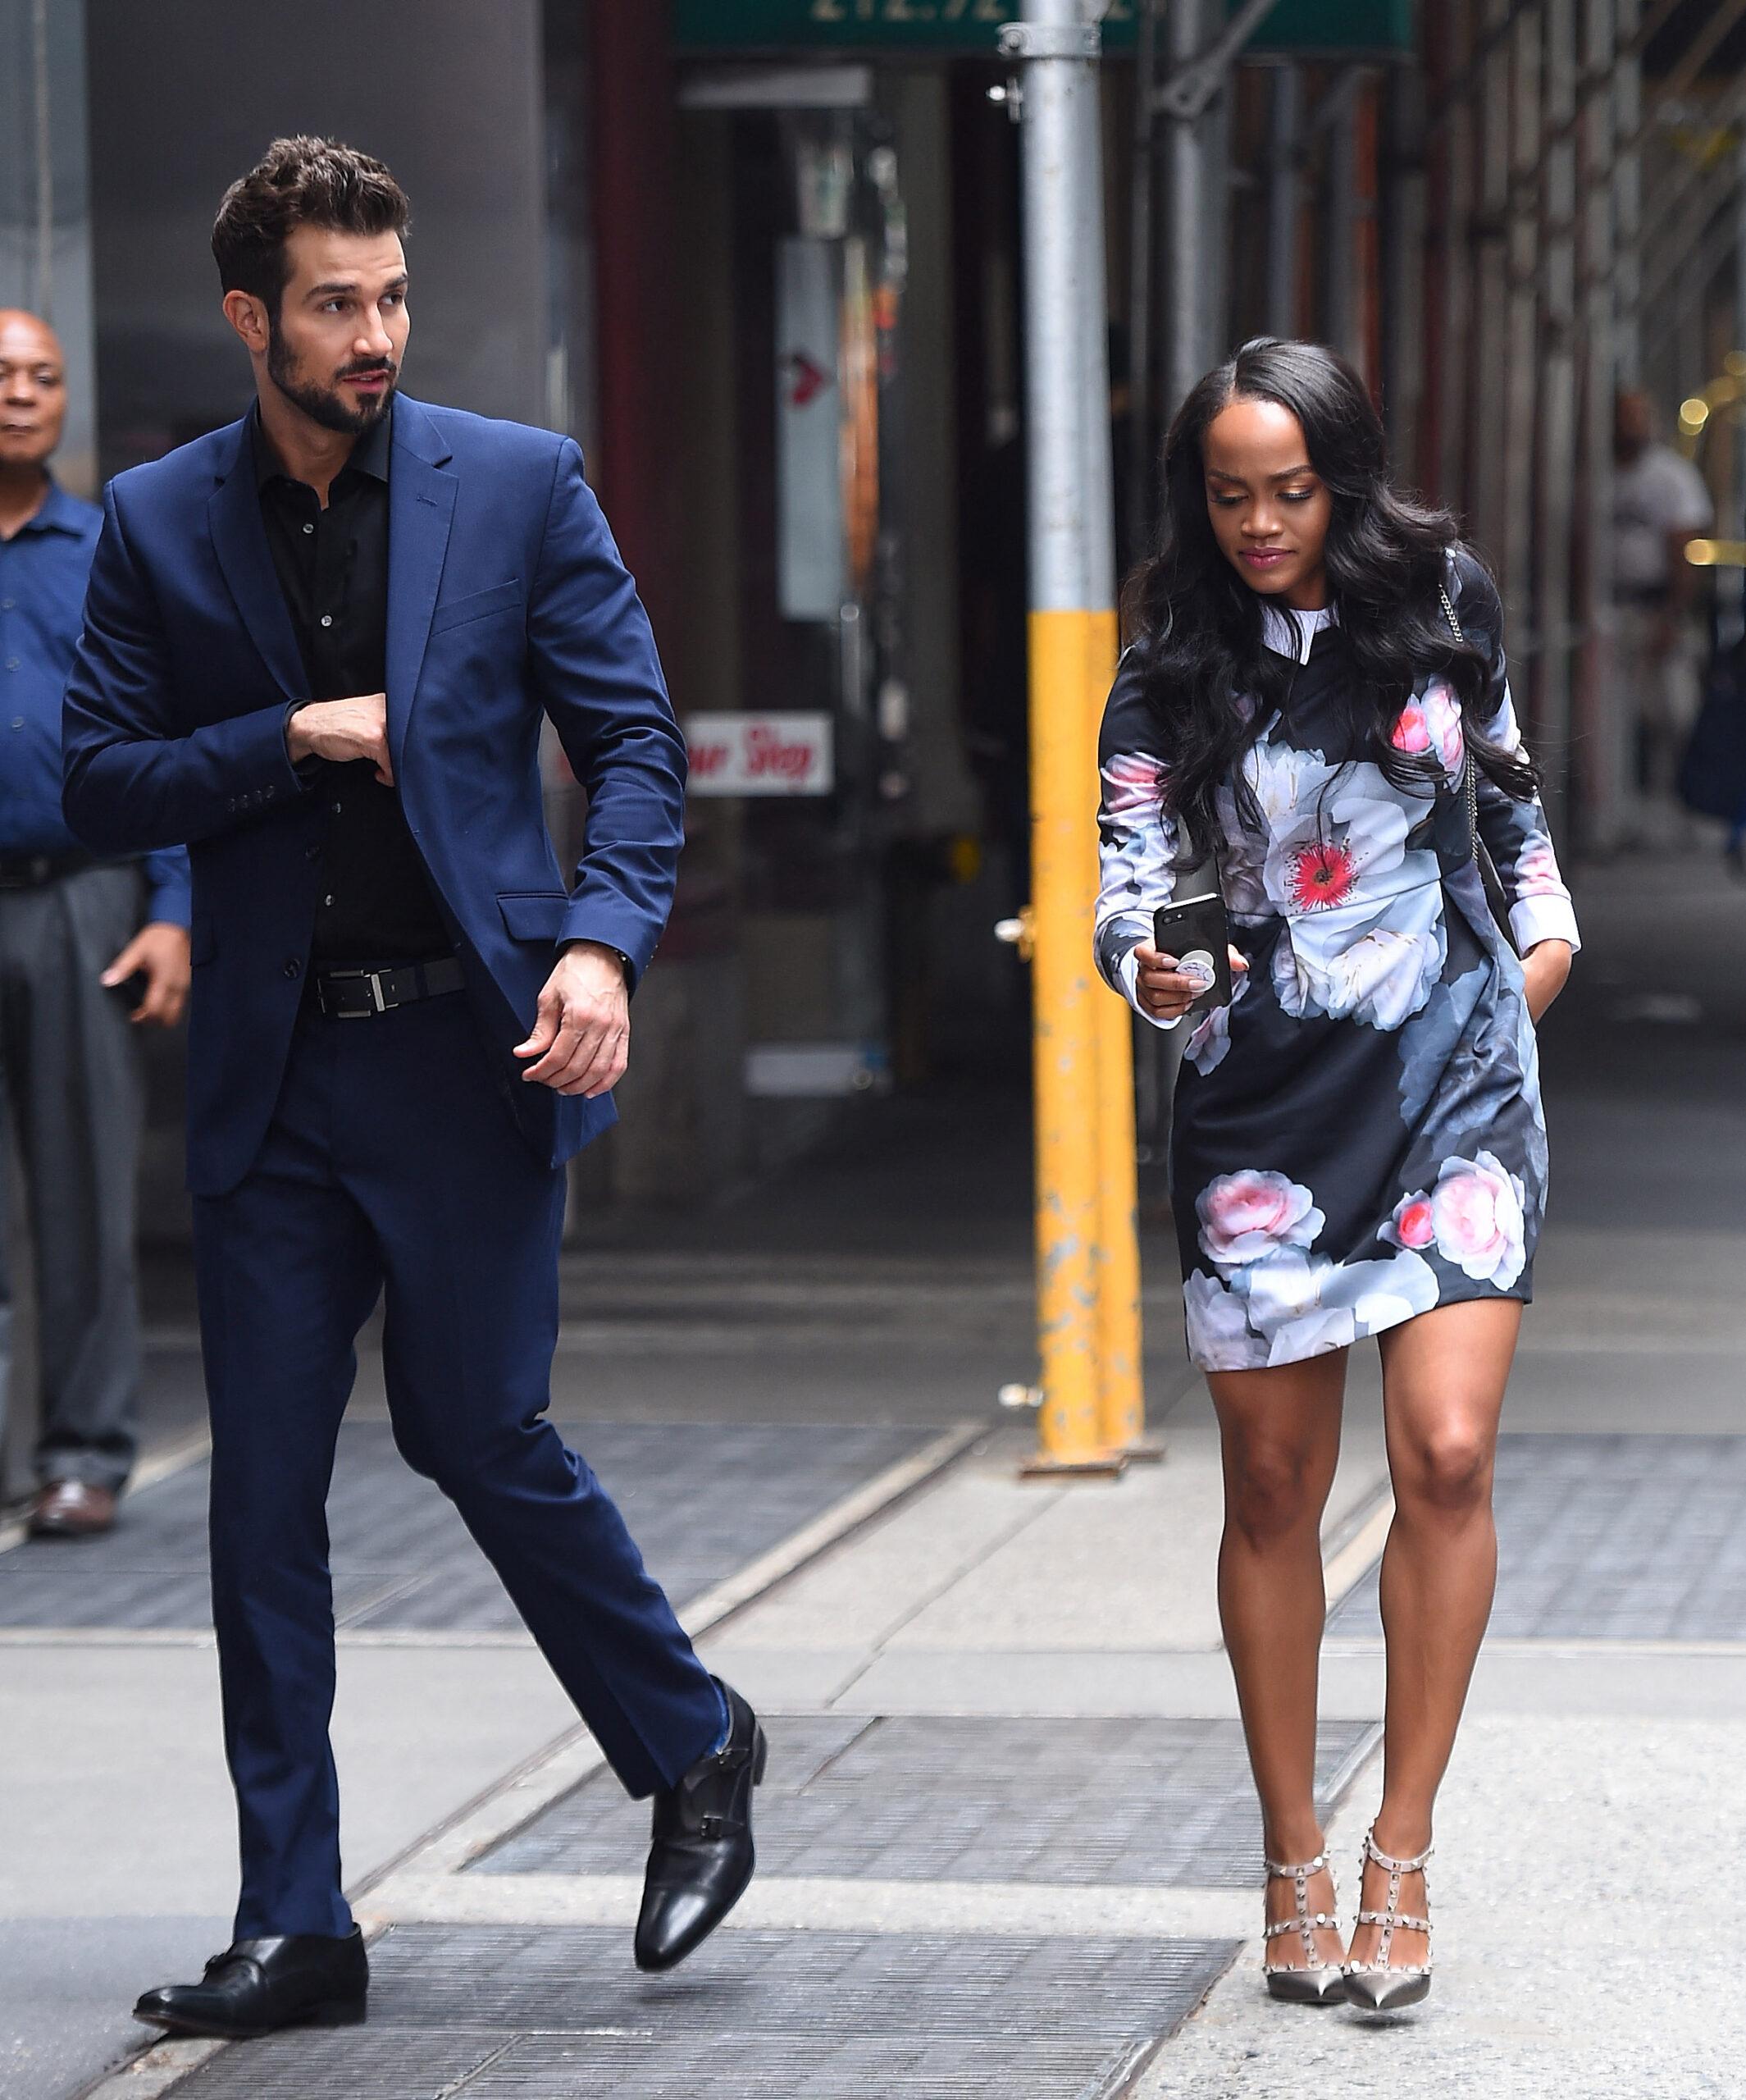 Rachel Lindsay and Bryan Abasolo stop by the "Wendy Williams" show